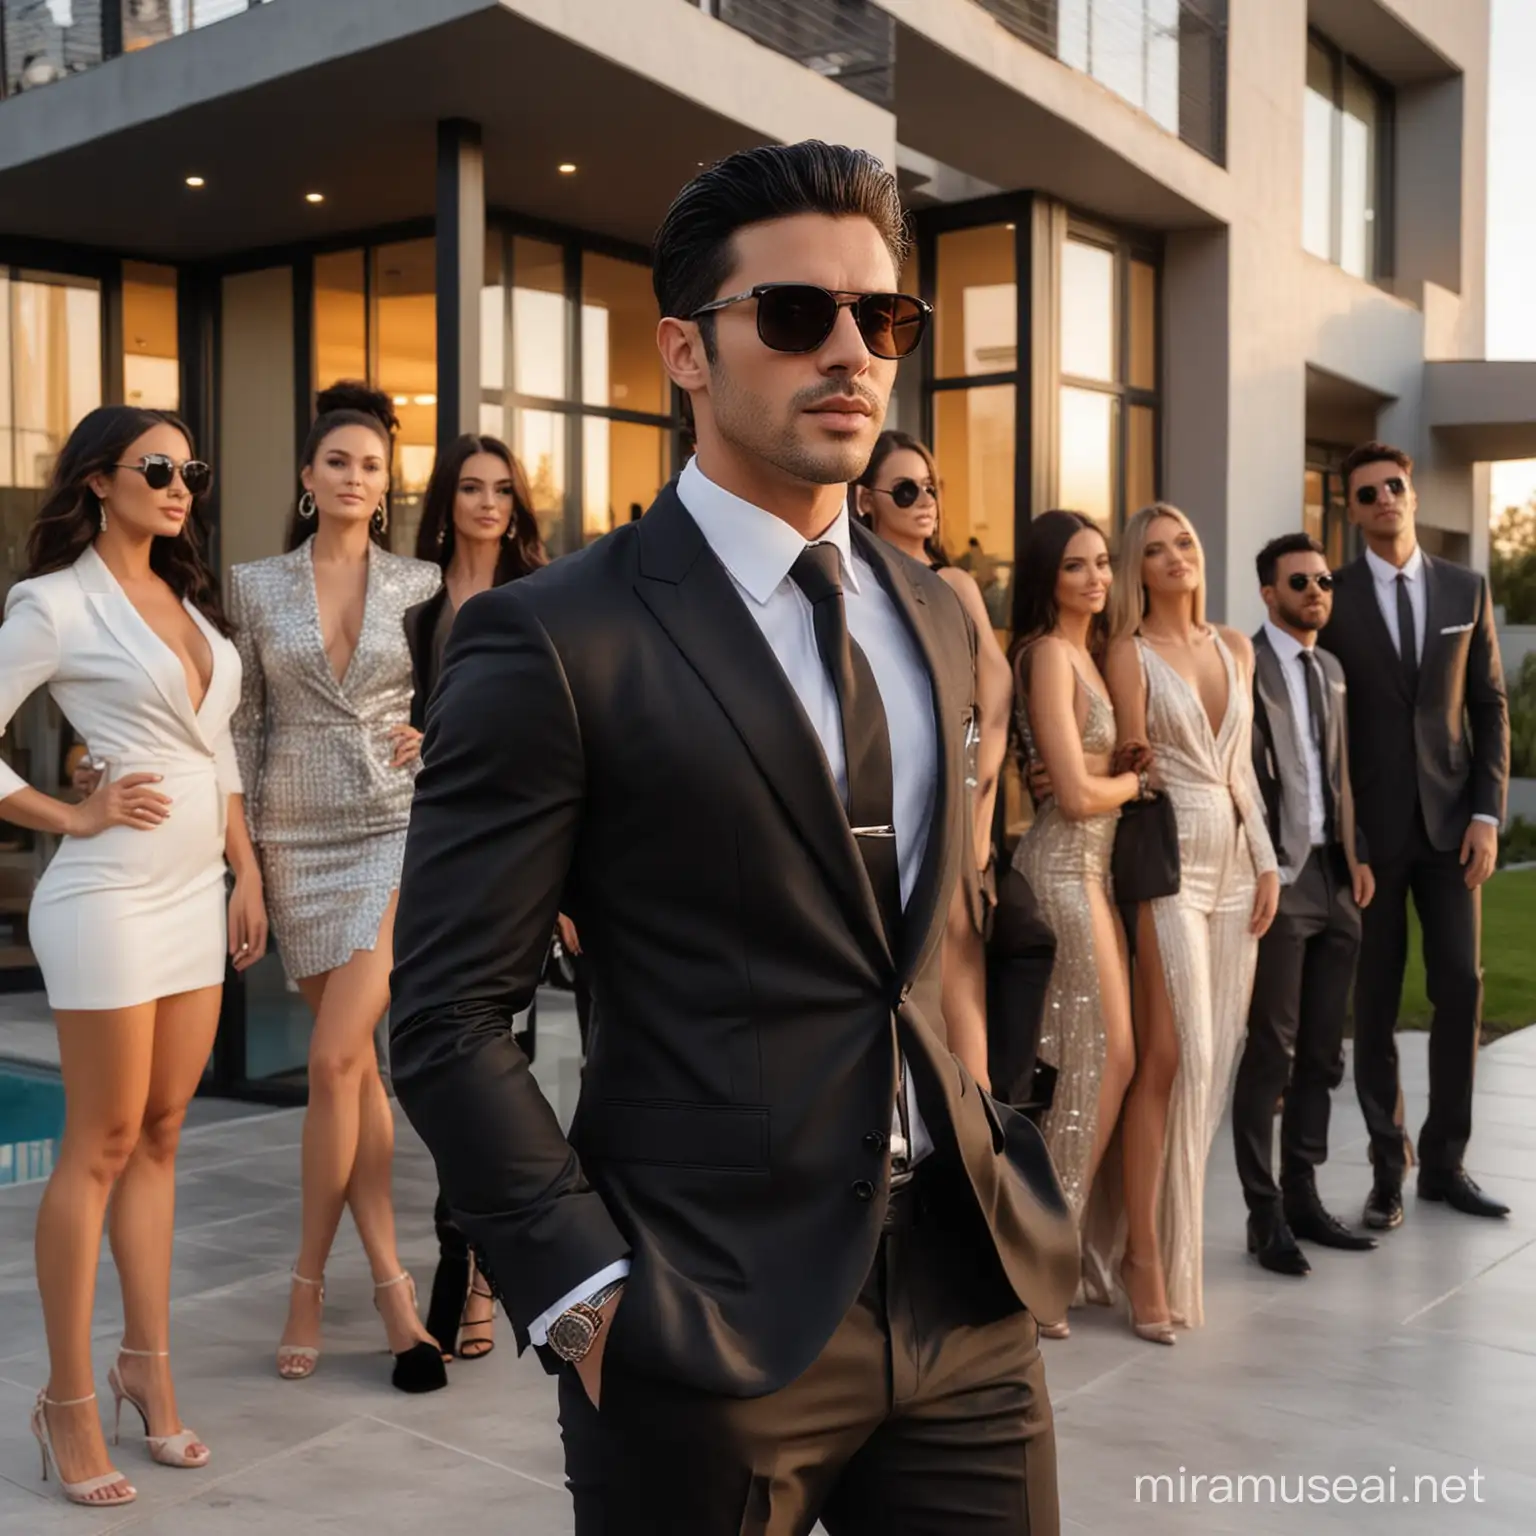 Handsome man wearing elegant suit and black sunglasses with black hair and stubble, next to a group of sexy women at a modern house with sunset sideways photos